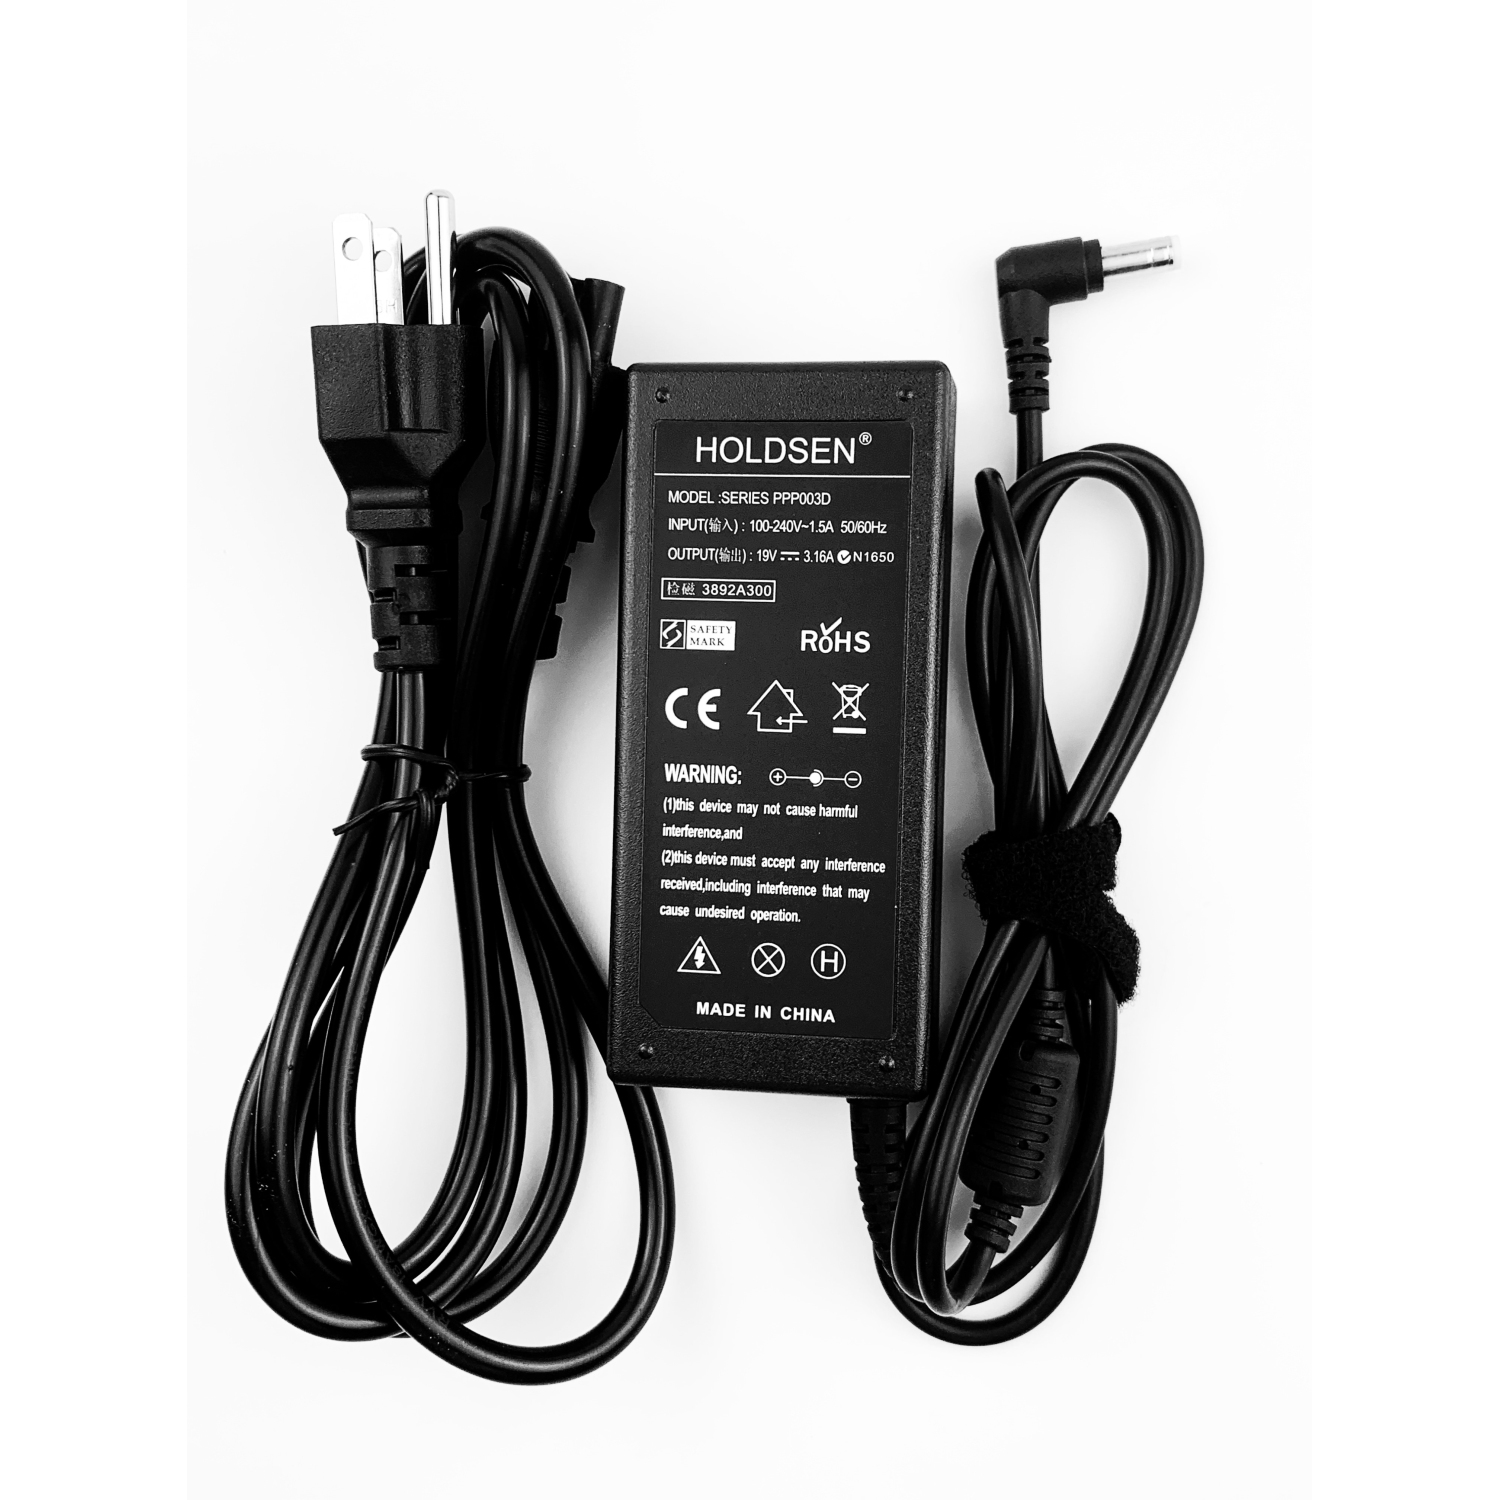 19V 2.37A 3.16A 60W AC adapter power cord for HP Pavilion 22XW 24ea 24es LCD monitors ONLY